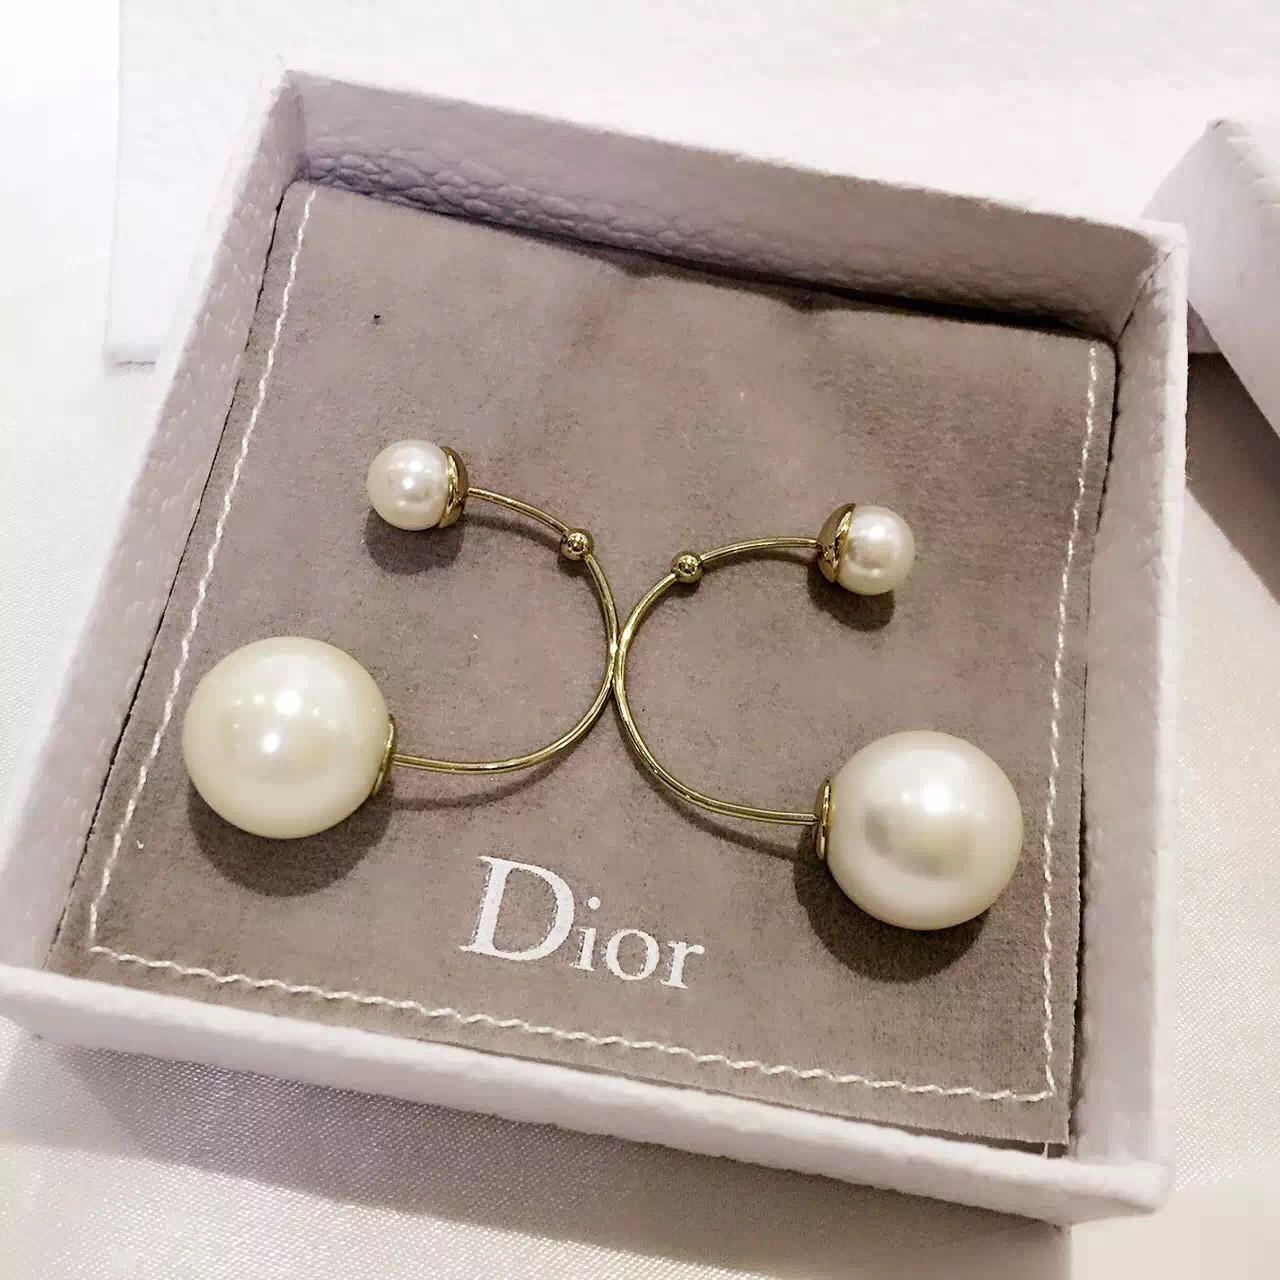 Christian Dior Tribal Earrings
 Authentic Christian Dior Ultradior Mise en Dior Tribal